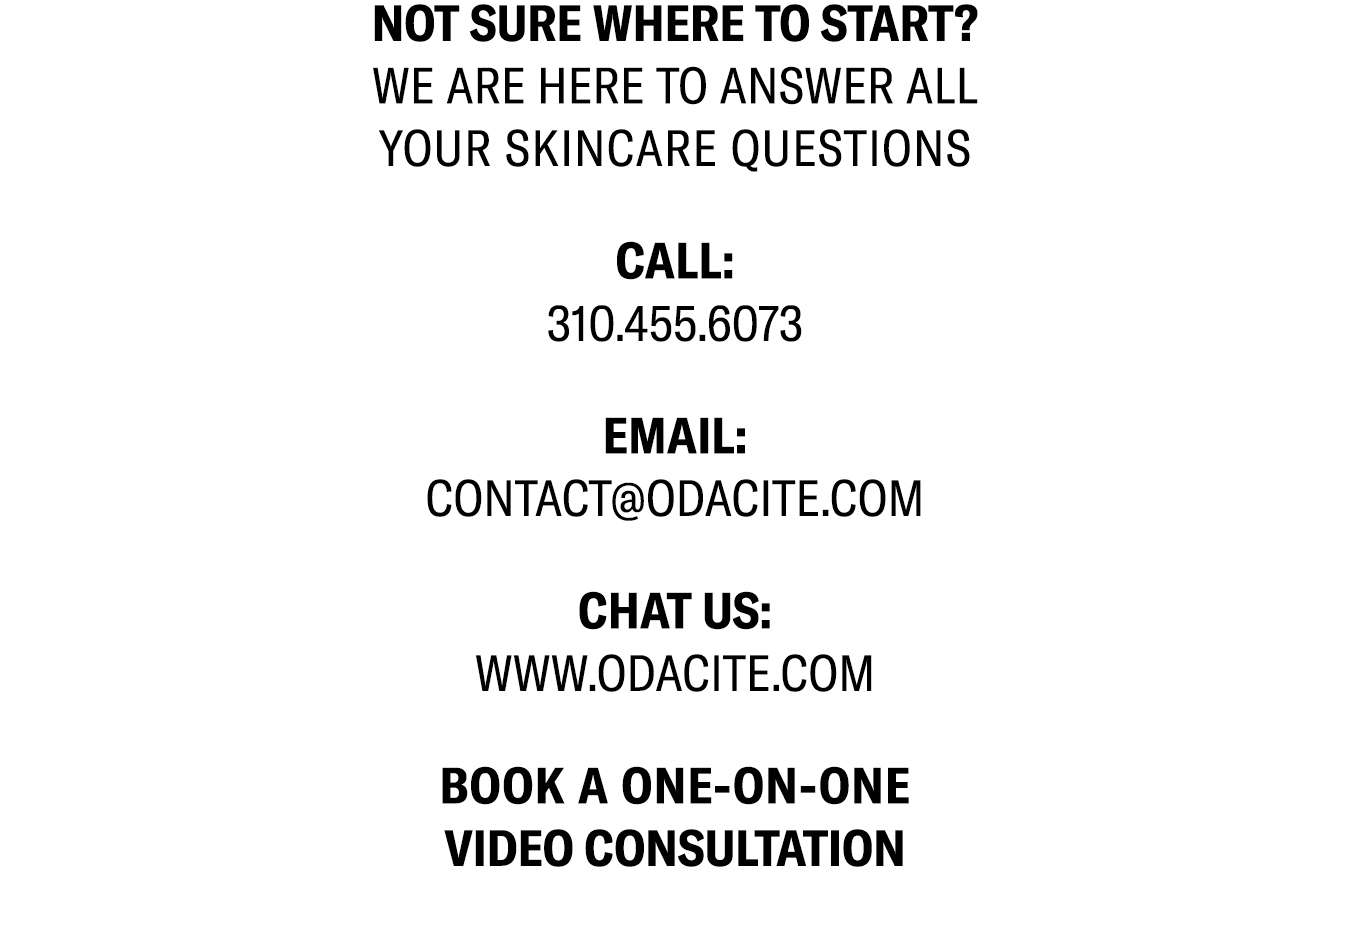 Contact Us. Book A One-On-One Video Consultation